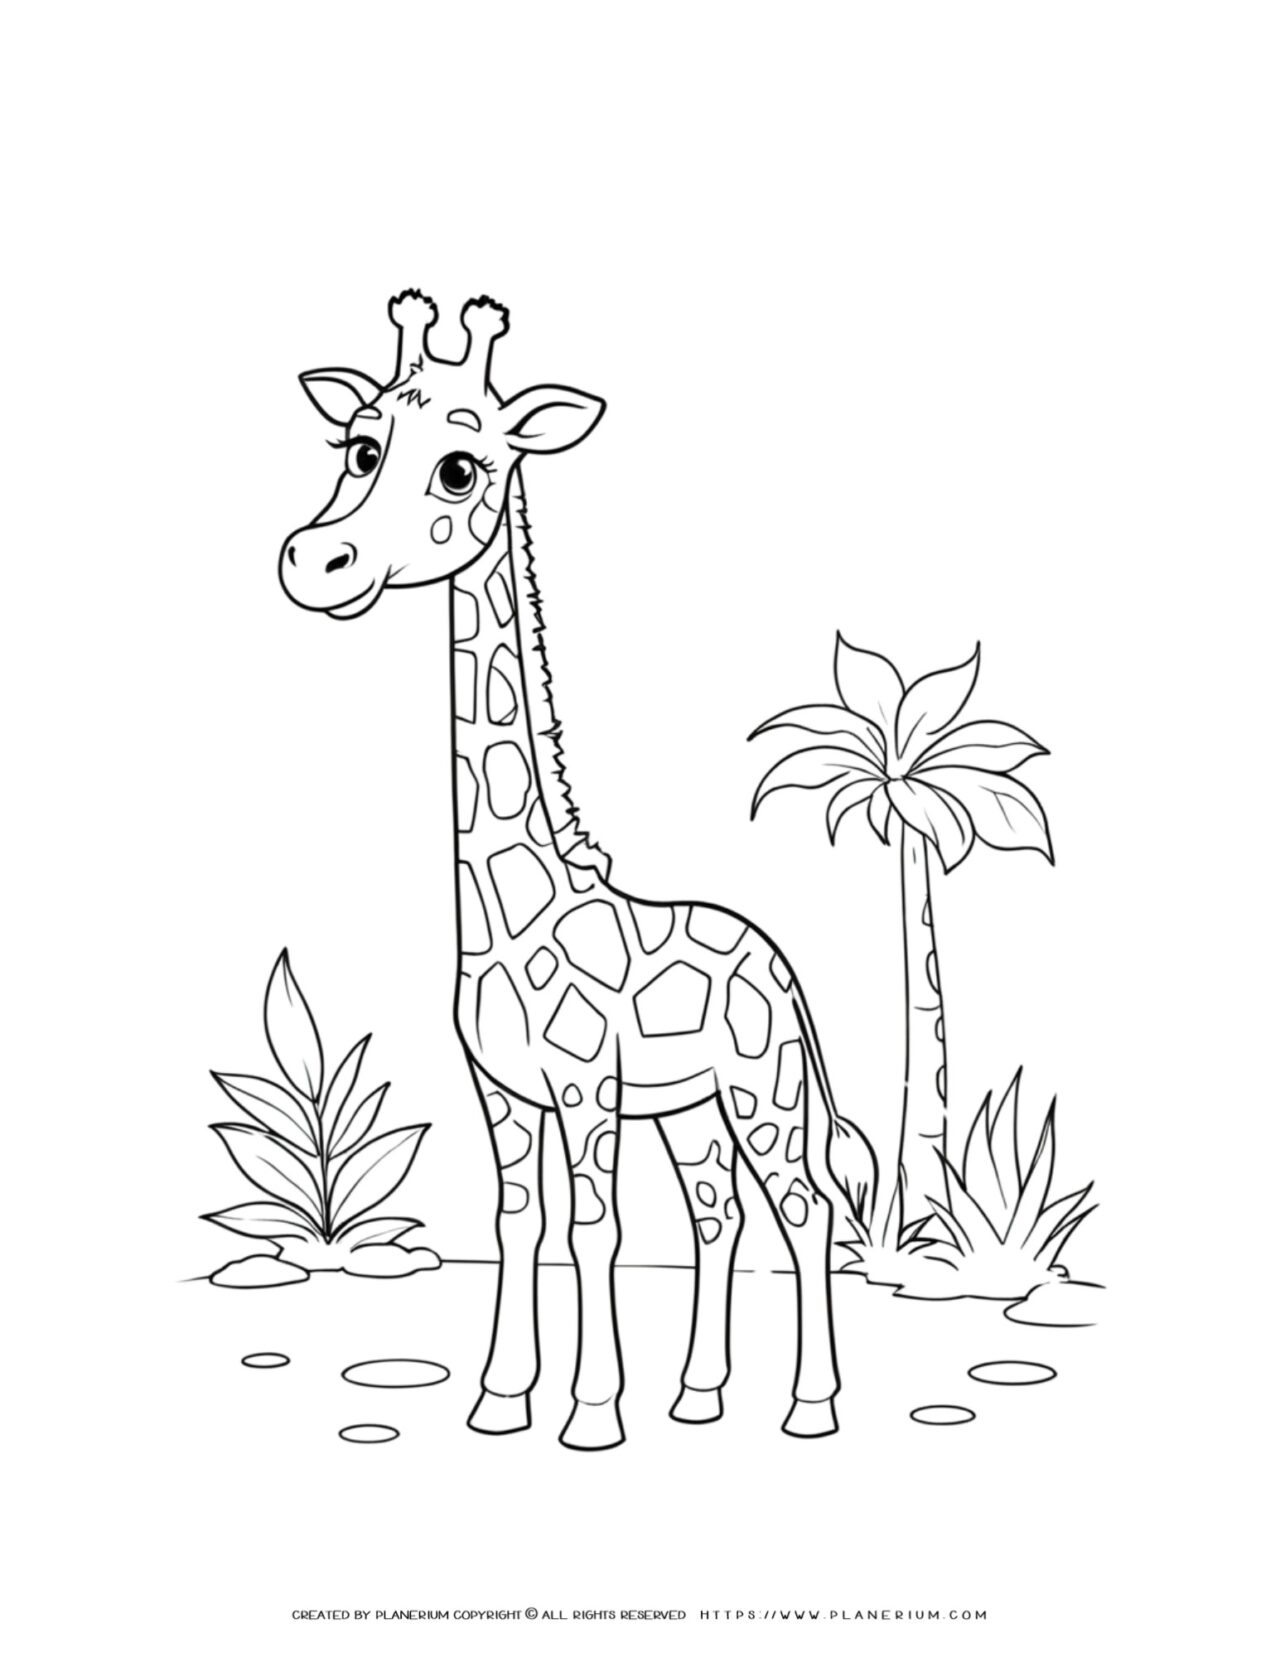 giraffe-illustration-comic-style-coloring-page-for-kids